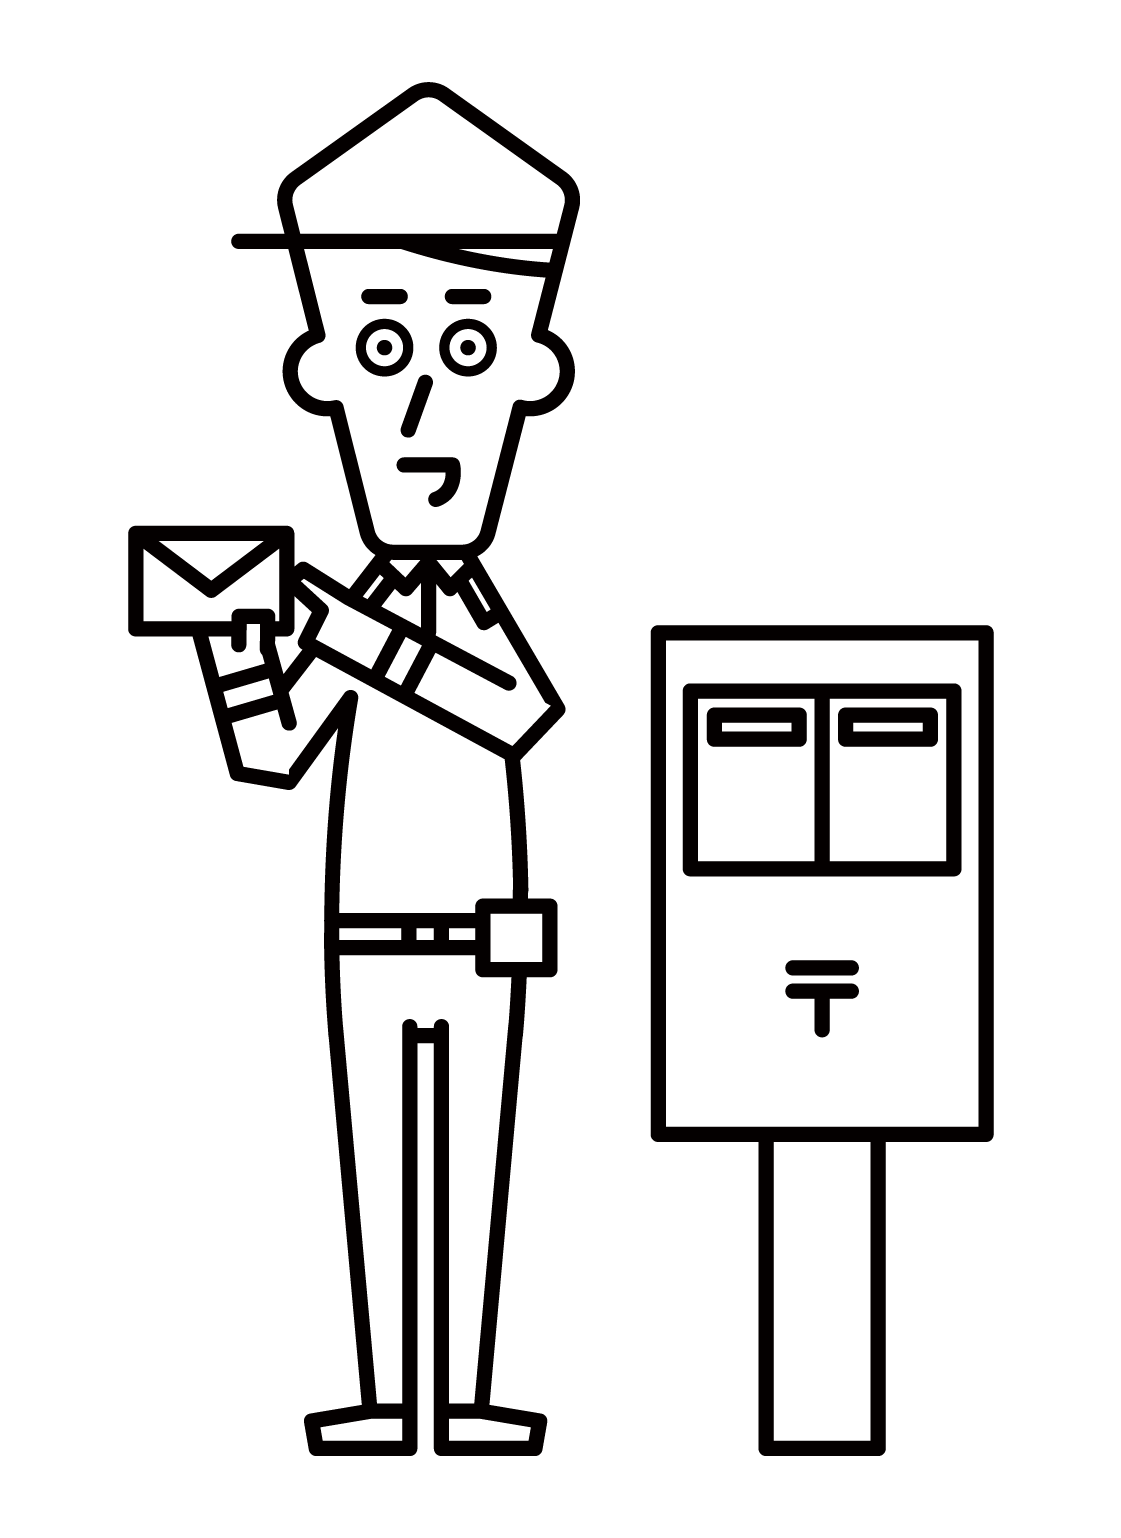 Illustration of a postman standing next to a postoffice